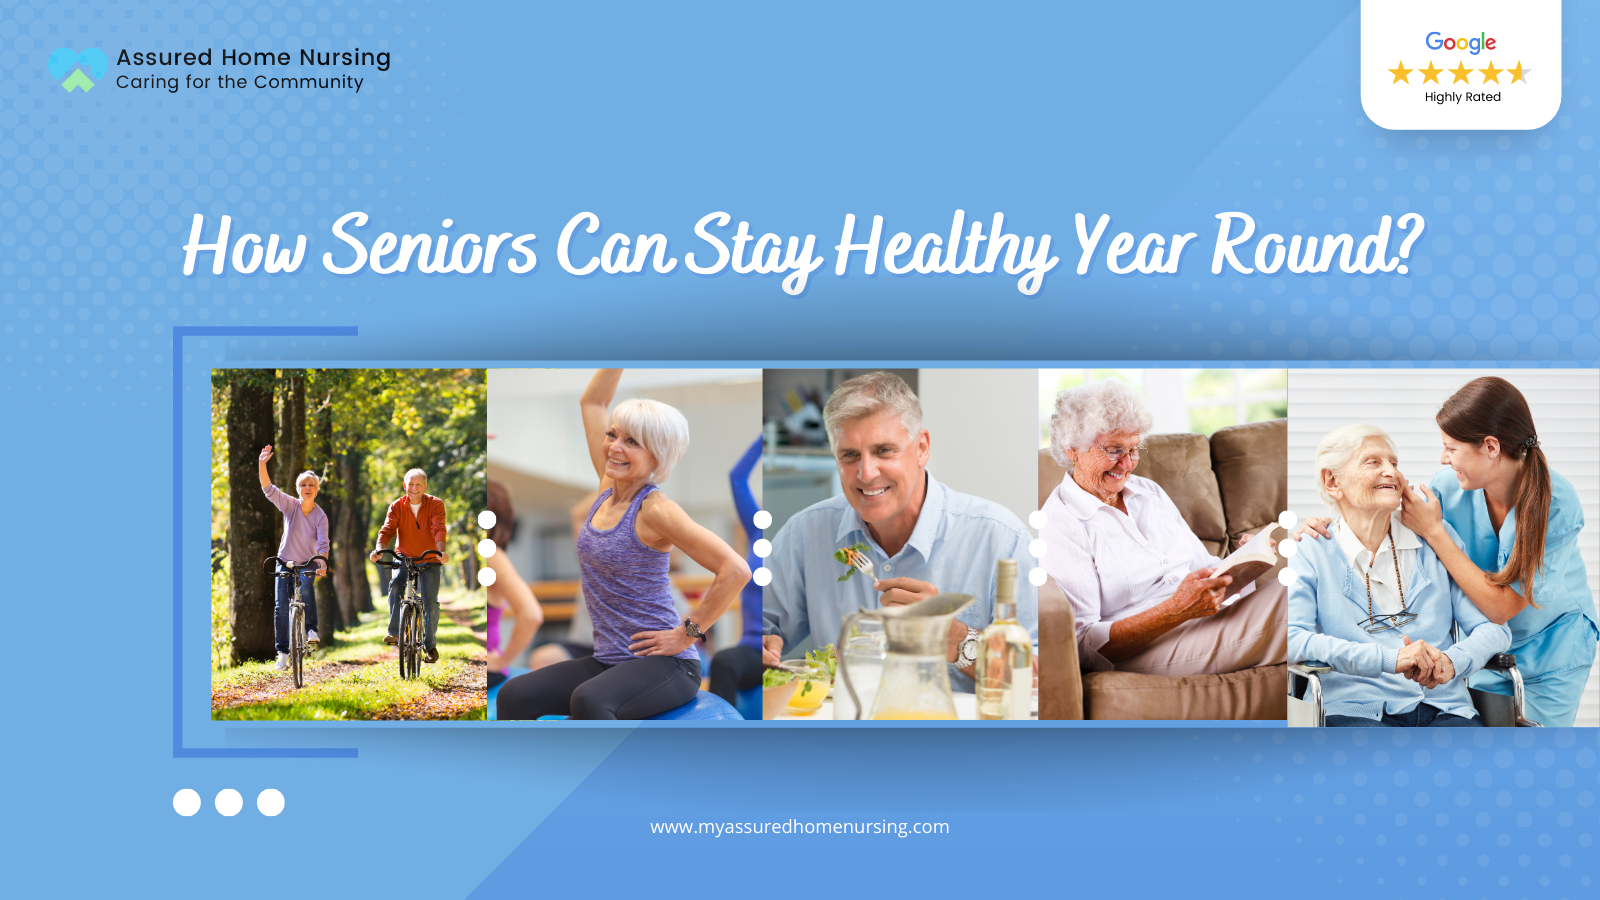 7 Tips for Seniors to Stay Healthy and Happy at Home